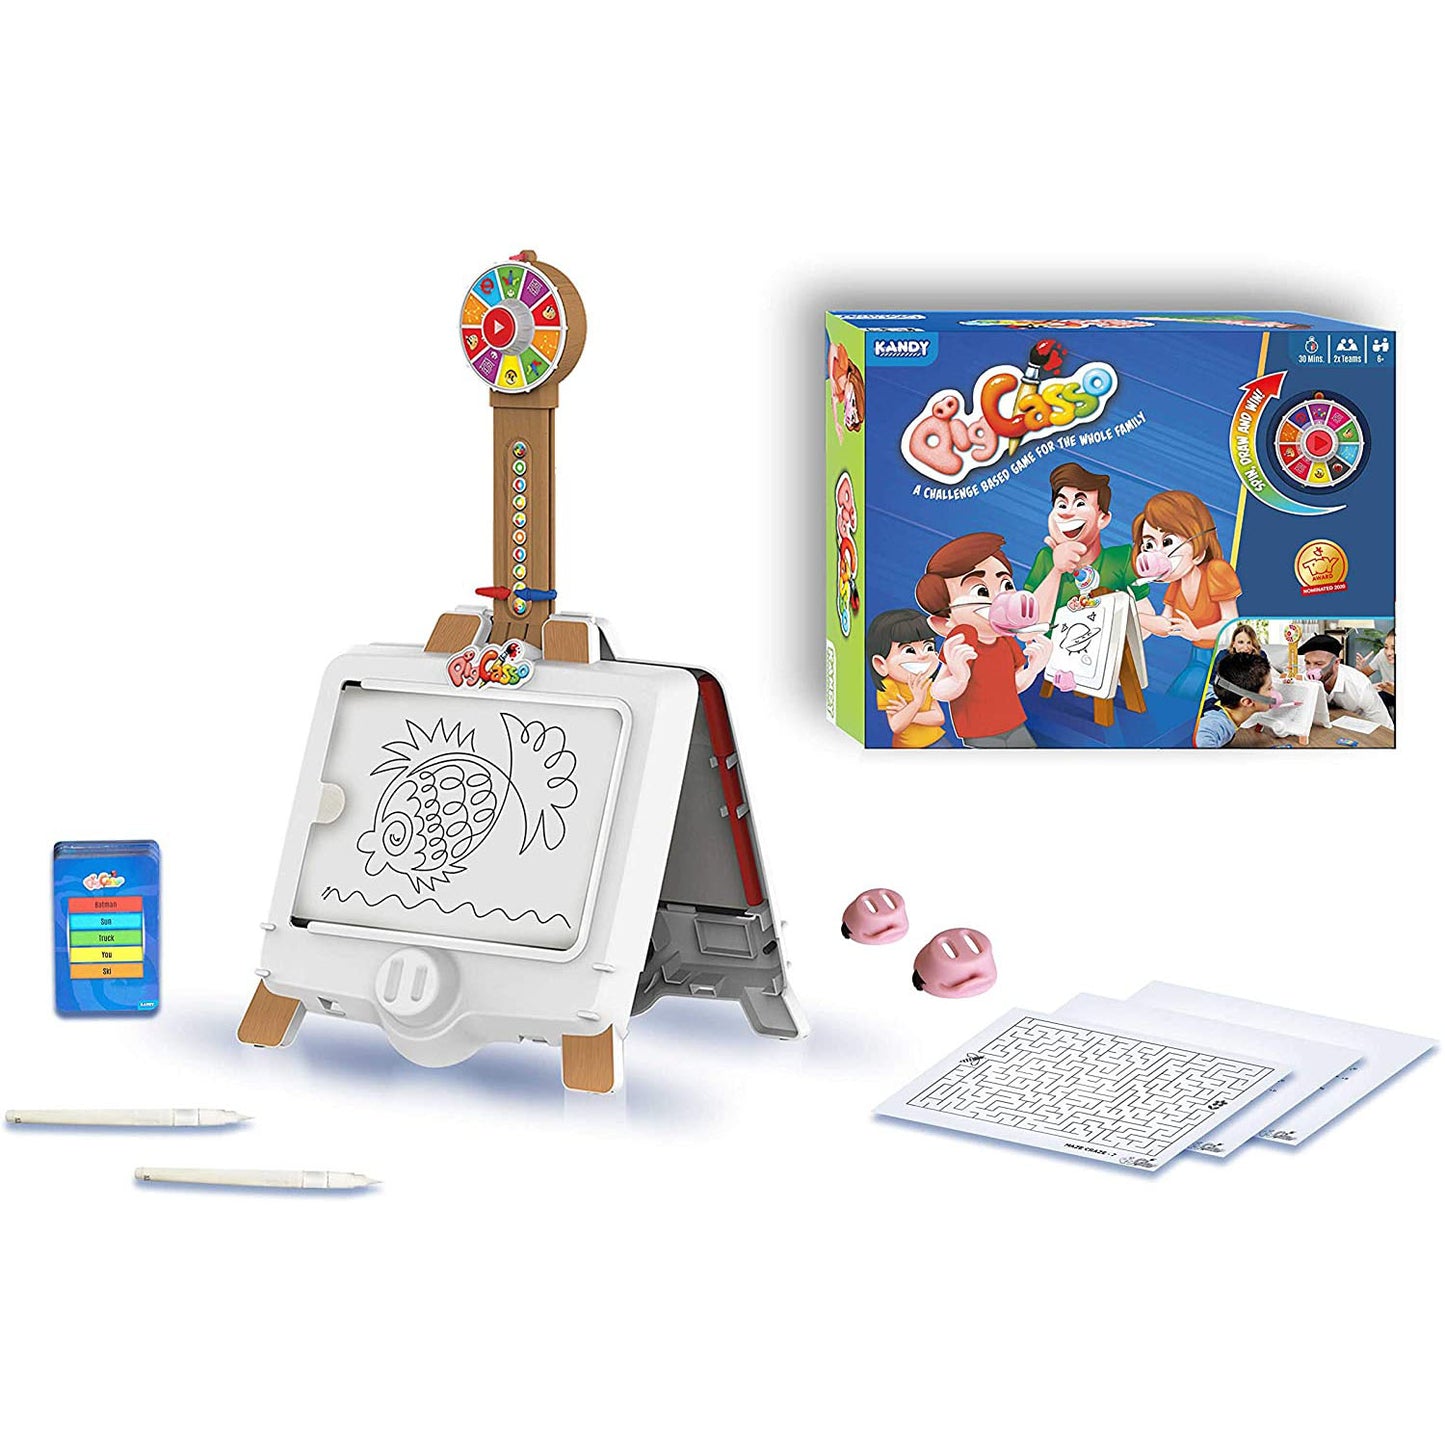 Kandy Pigcasso Drawing Game - Fun For the Whole Family